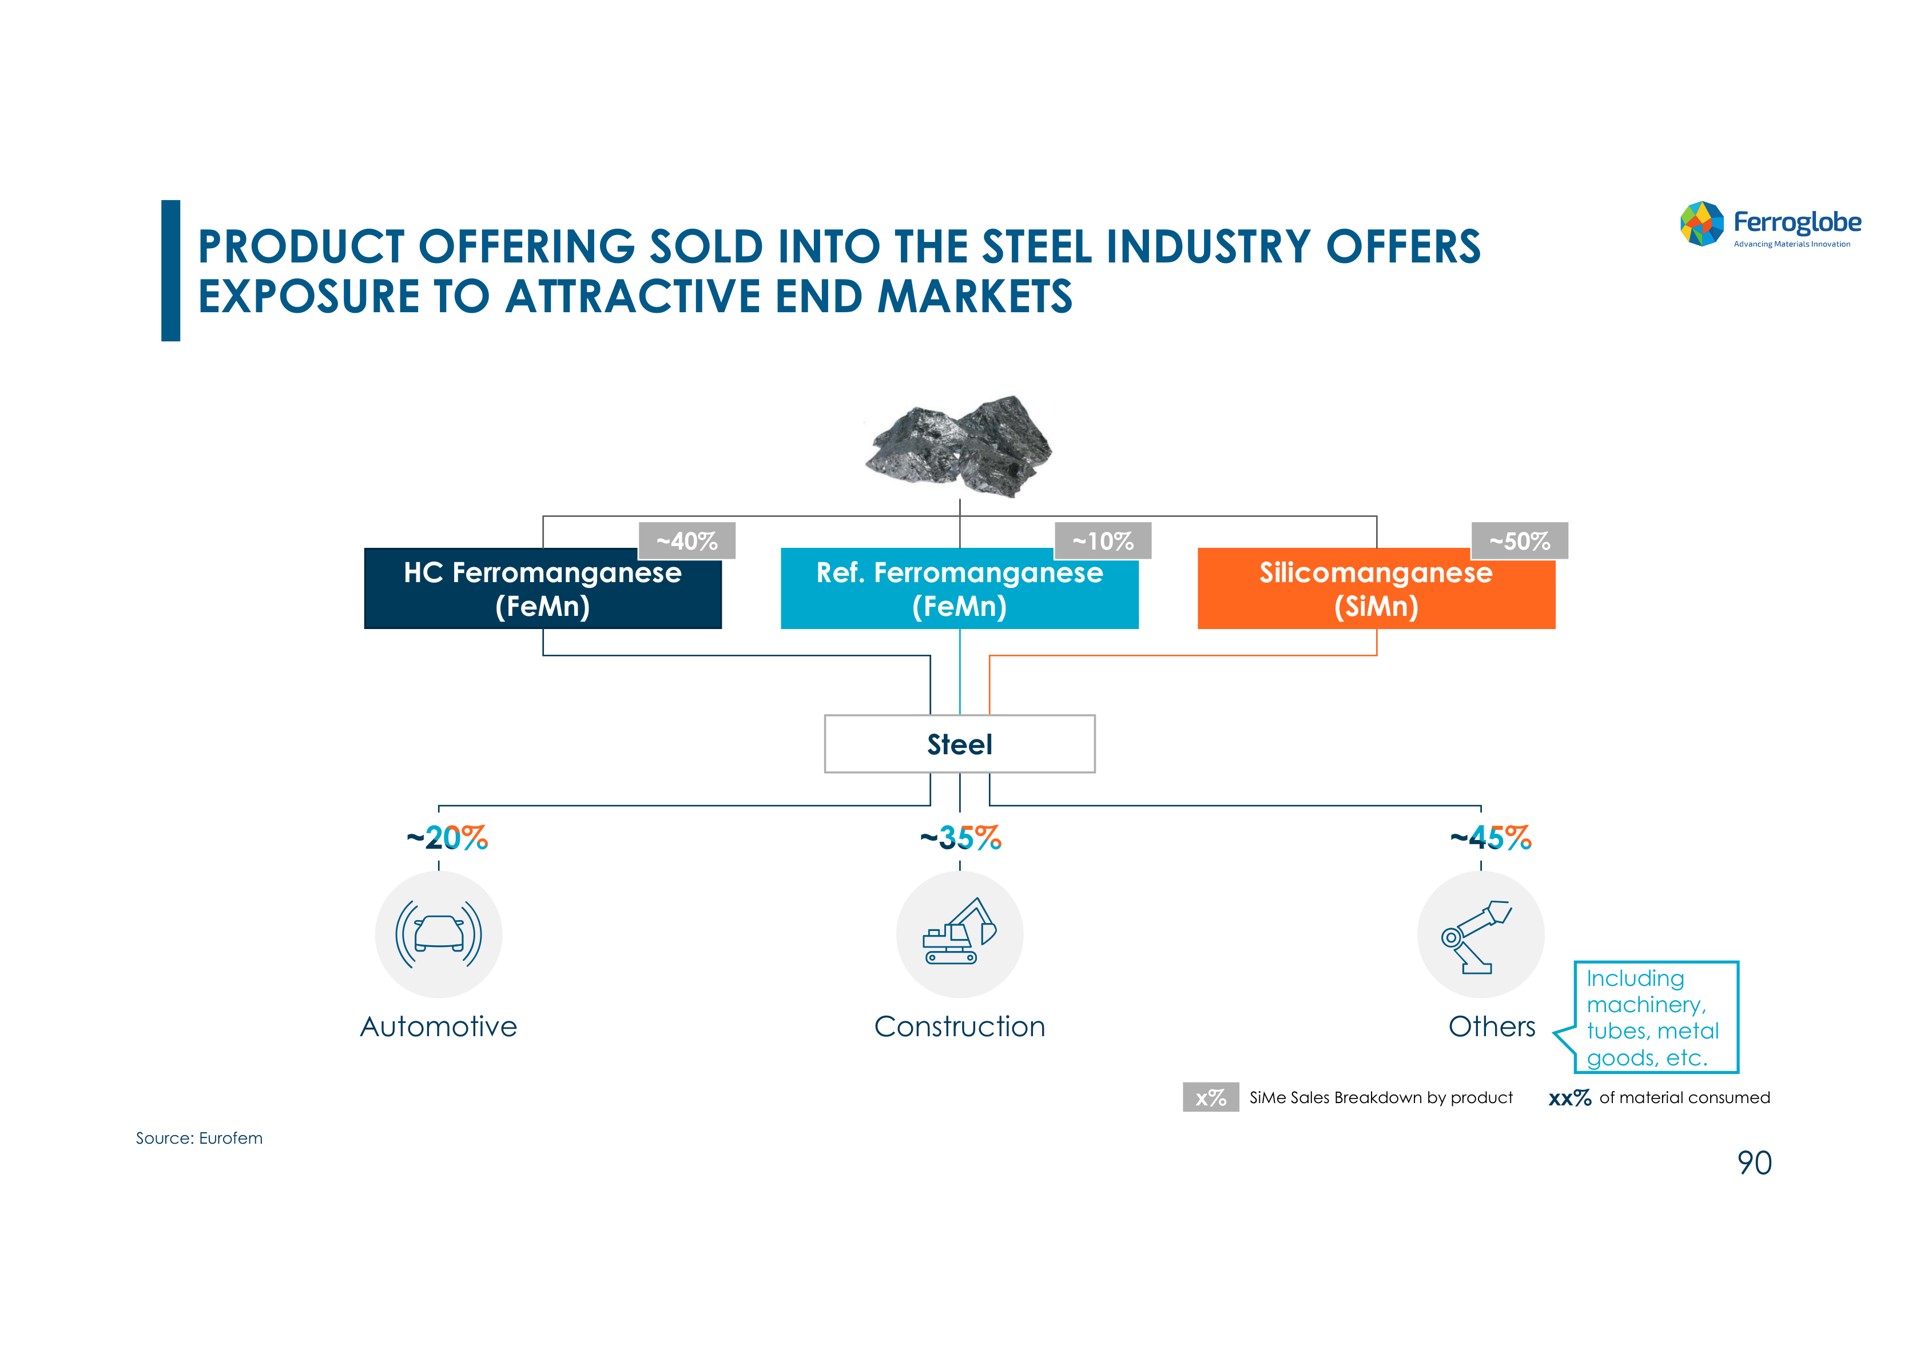 product offering sold into the steel industry offers exposure to attractive end markets | Ferroglobe